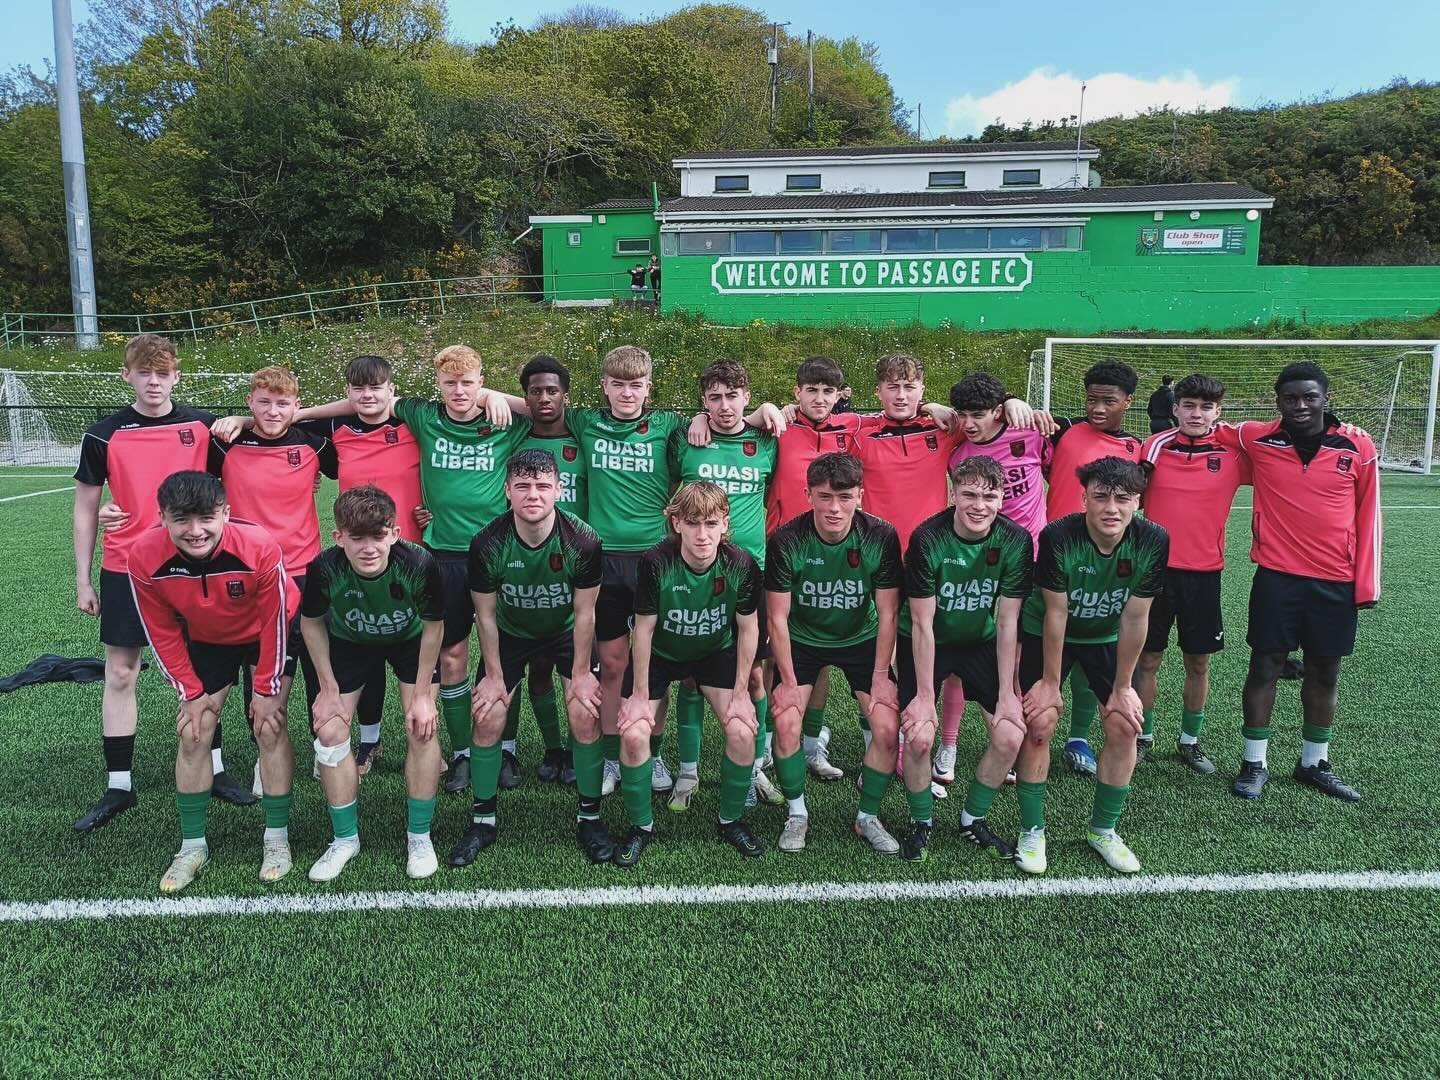 It was all to play for today for the St Peter&rsquo;s U19 Boys in the Cork School&rsquo;s Cup Semi Final against Scoil Mhuire gan Sm&aacute;l (SMGS) Blarney ⚽️ To lose would mean the end of their season-long winning streak which has seen them attain 